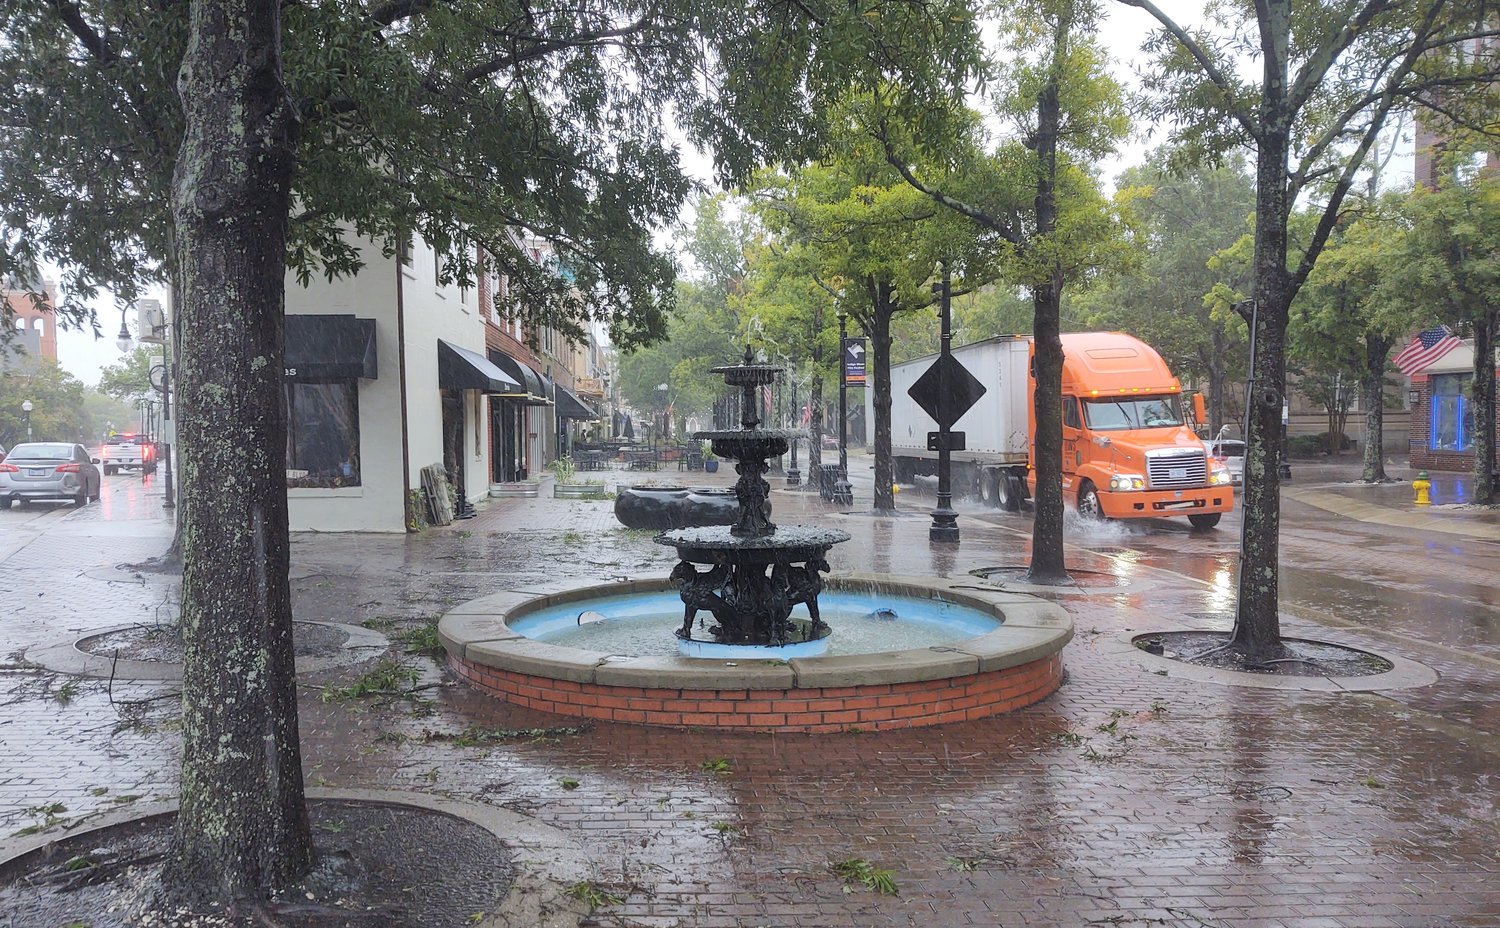 A tractor-trailer splashes water on the curb on Hay Street in downtown Fayetteville just before 5 p.m. Friday as the remnants of Hurricane Ian passed through the region.